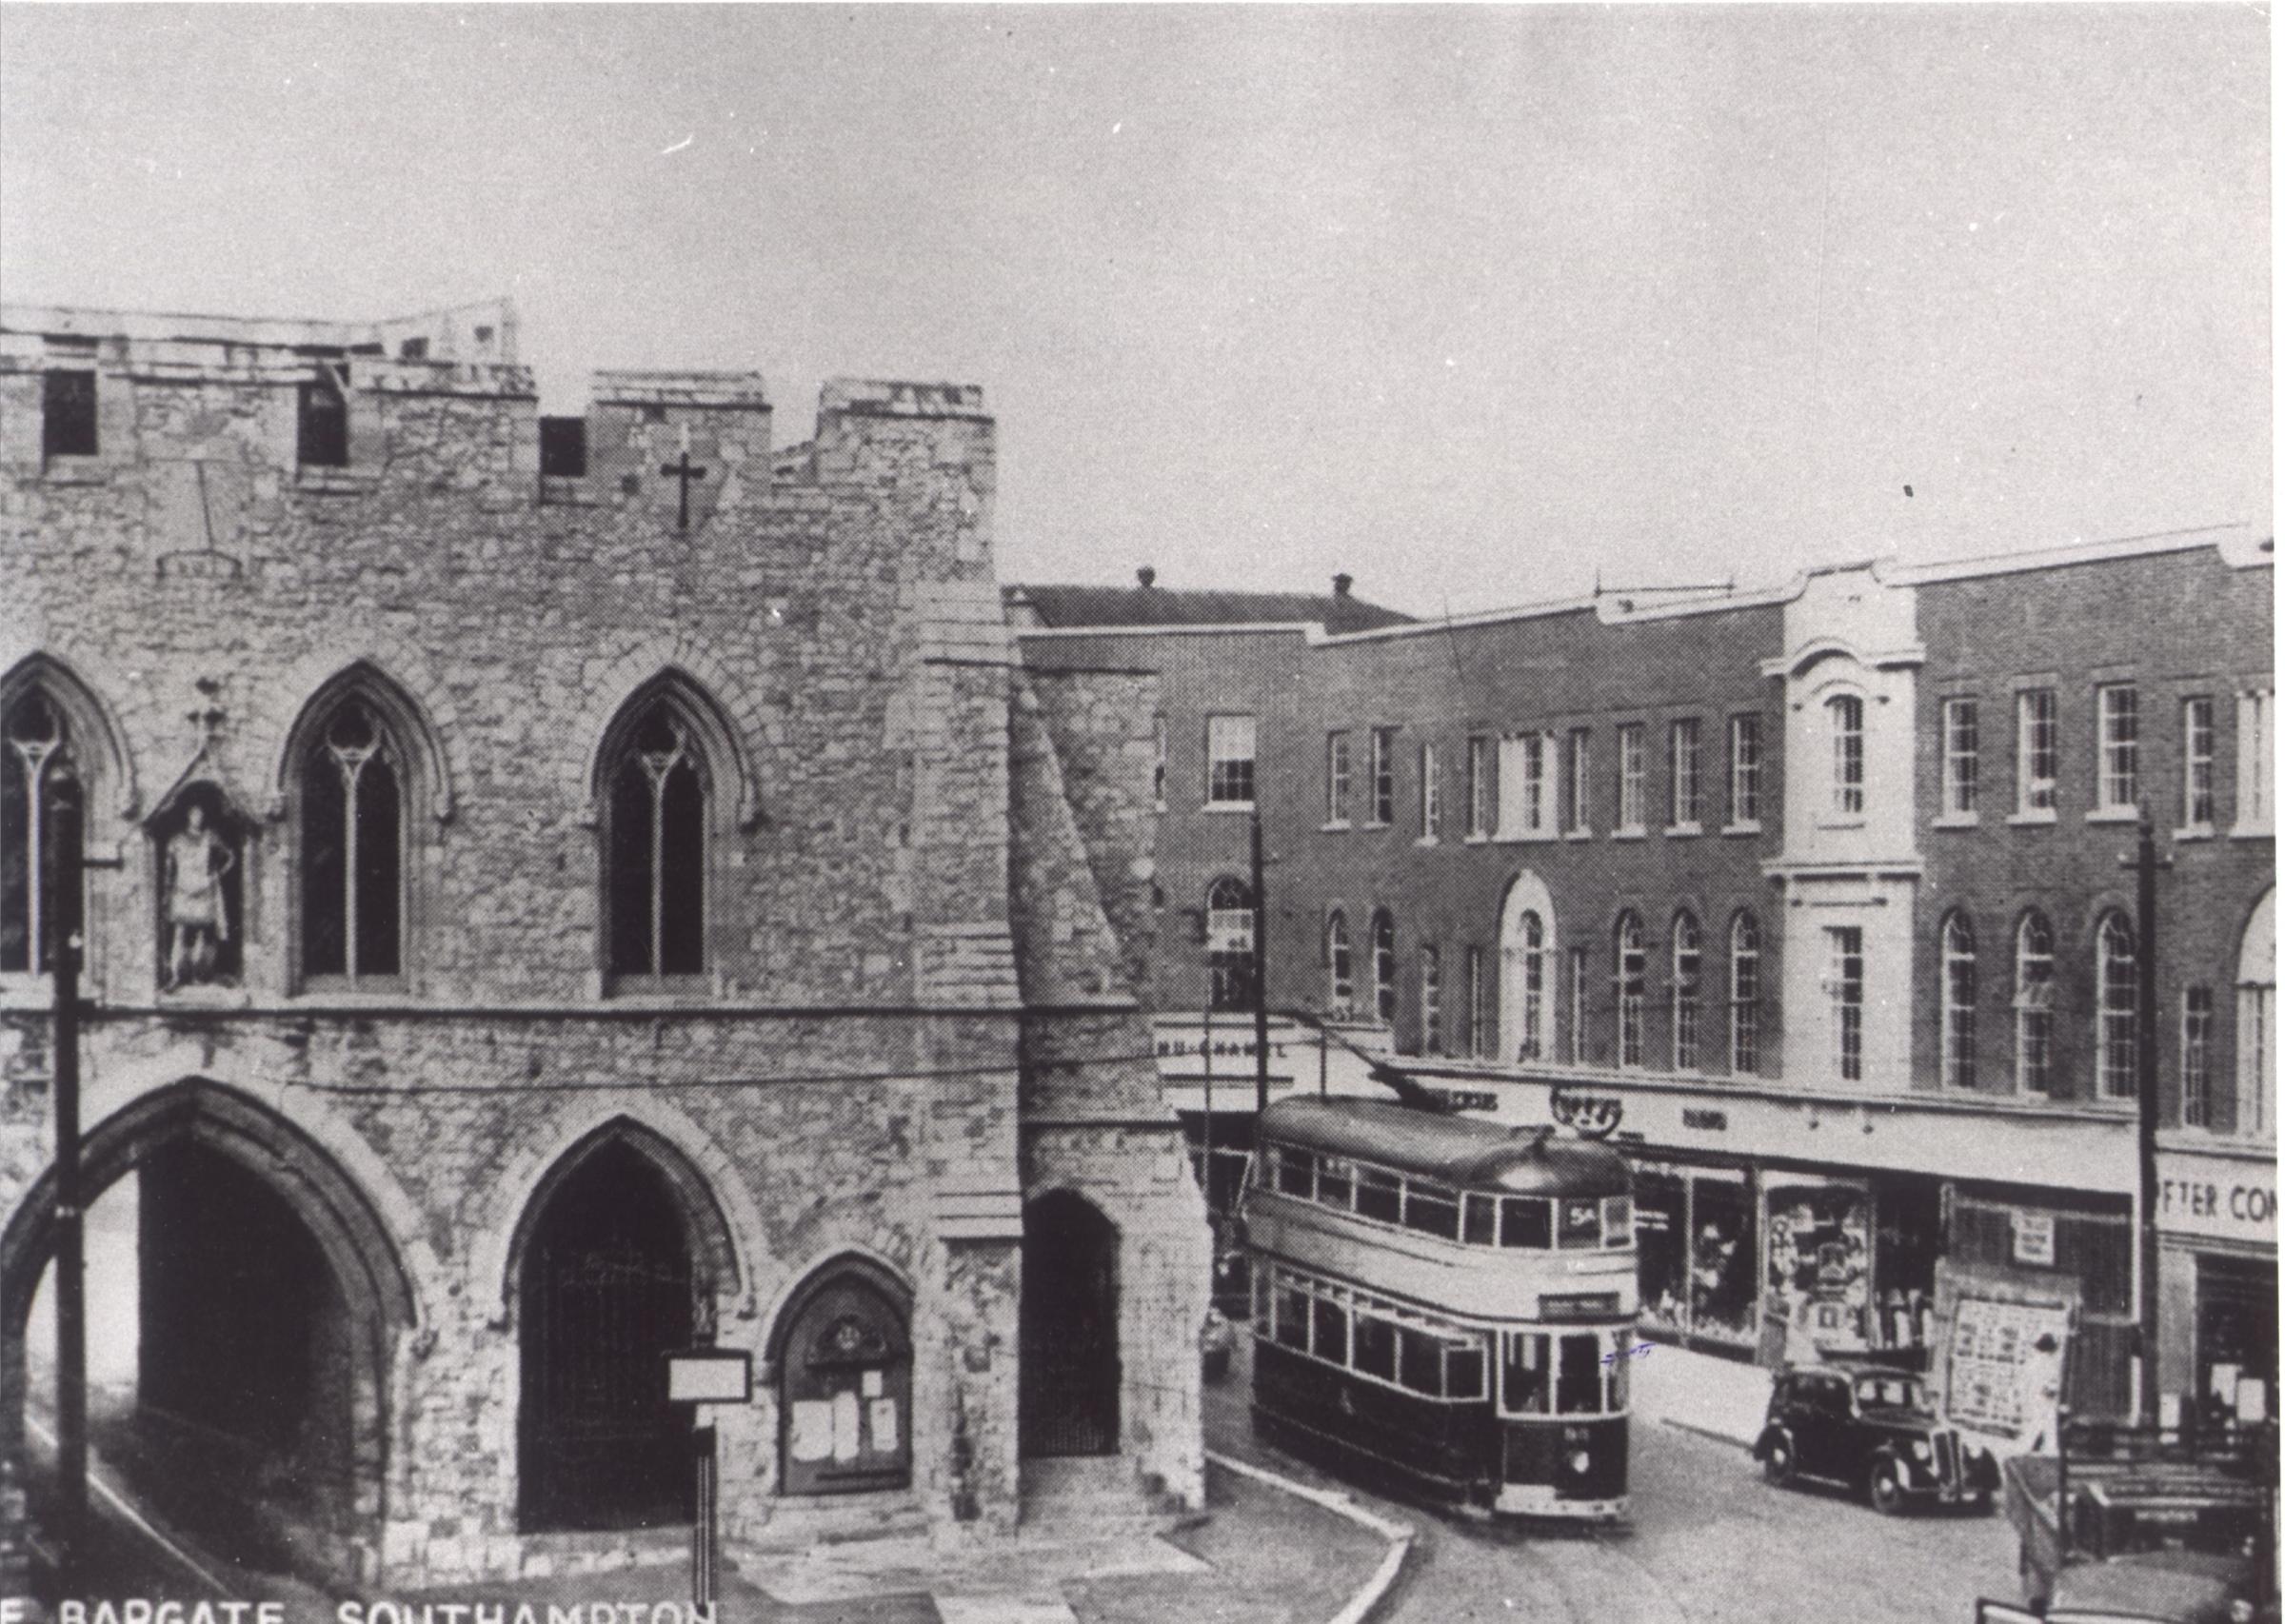 Heritage. Bargate with tram.